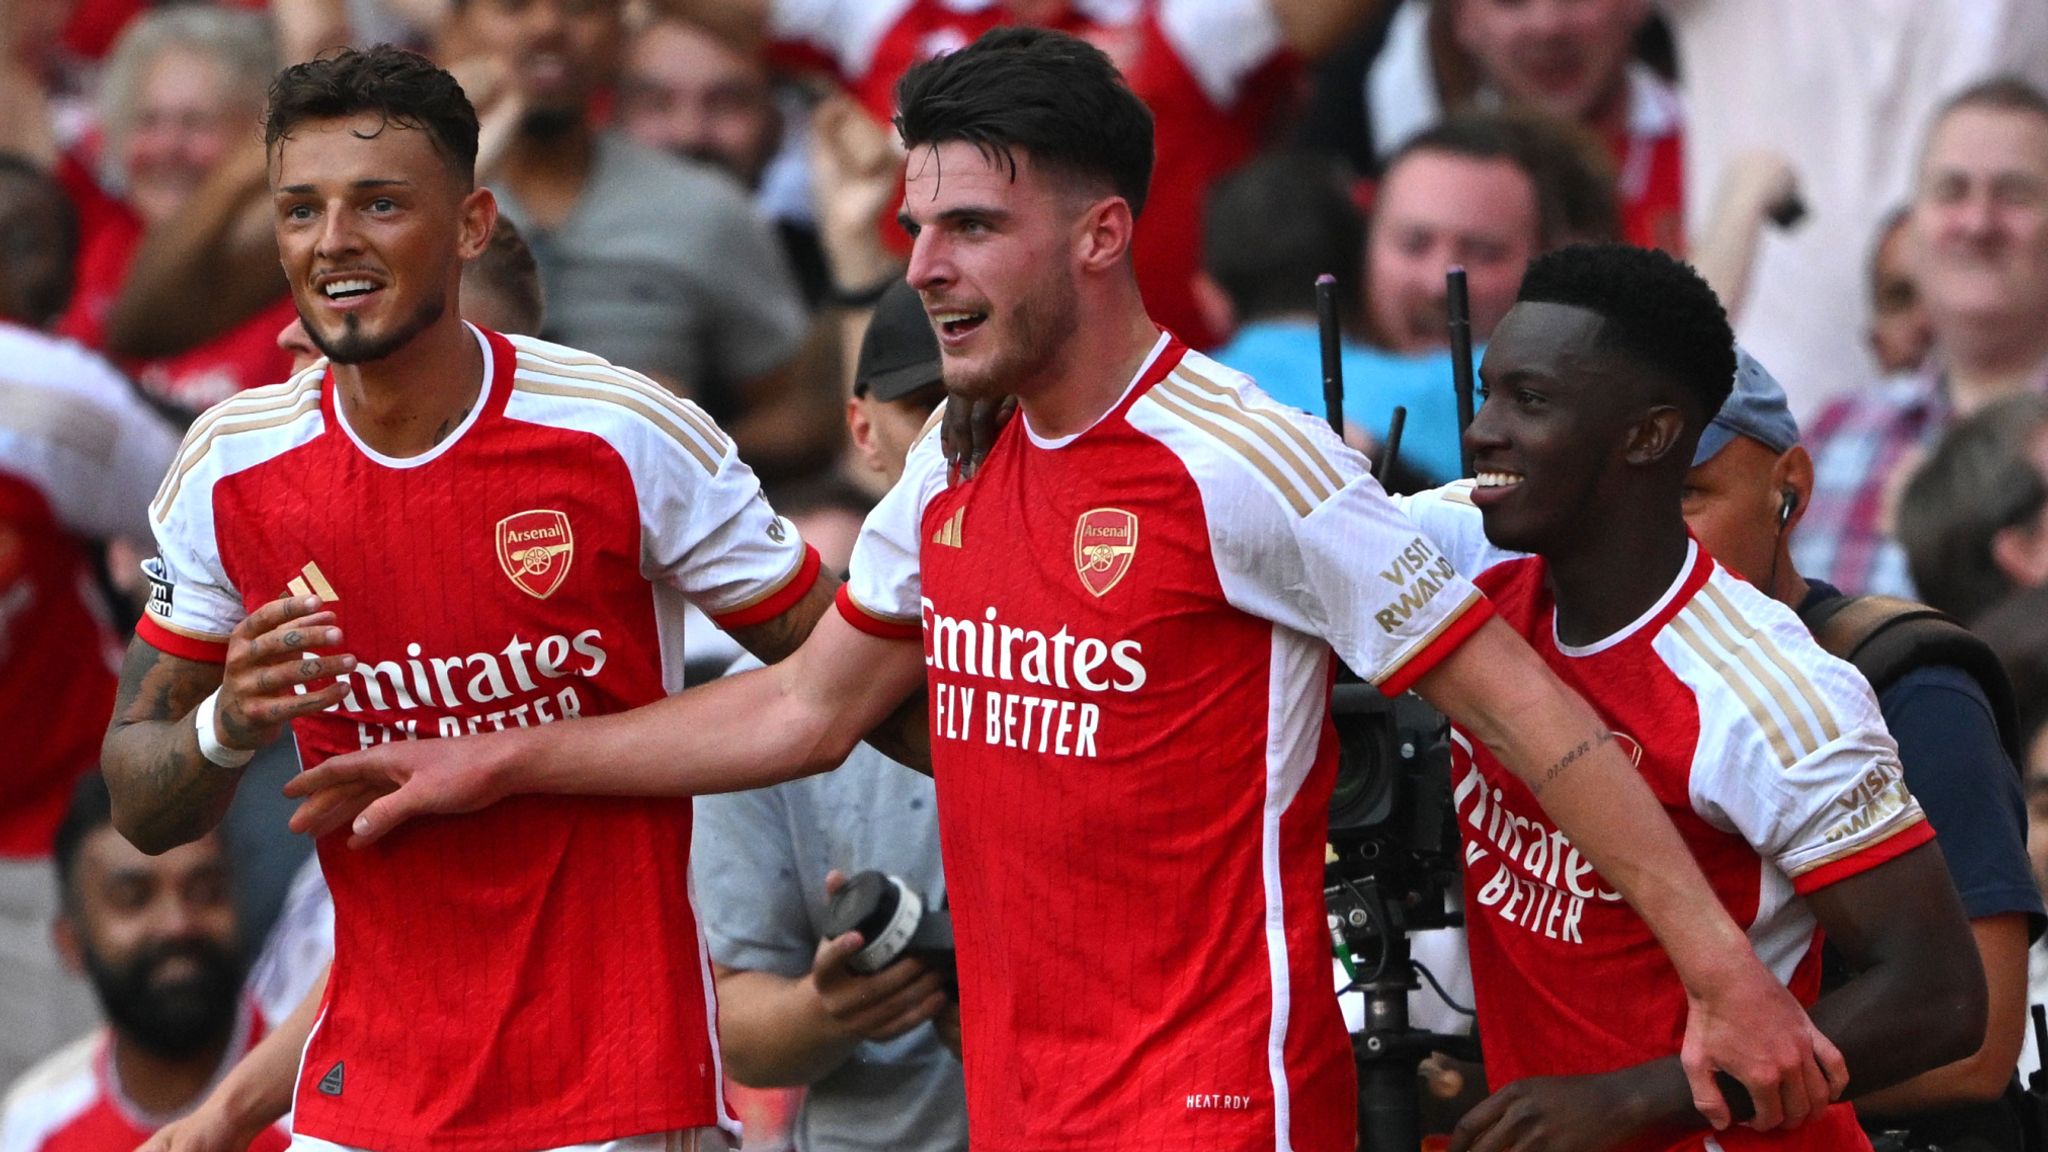 Arsenal 3 - 1 Manchester United - Match Report